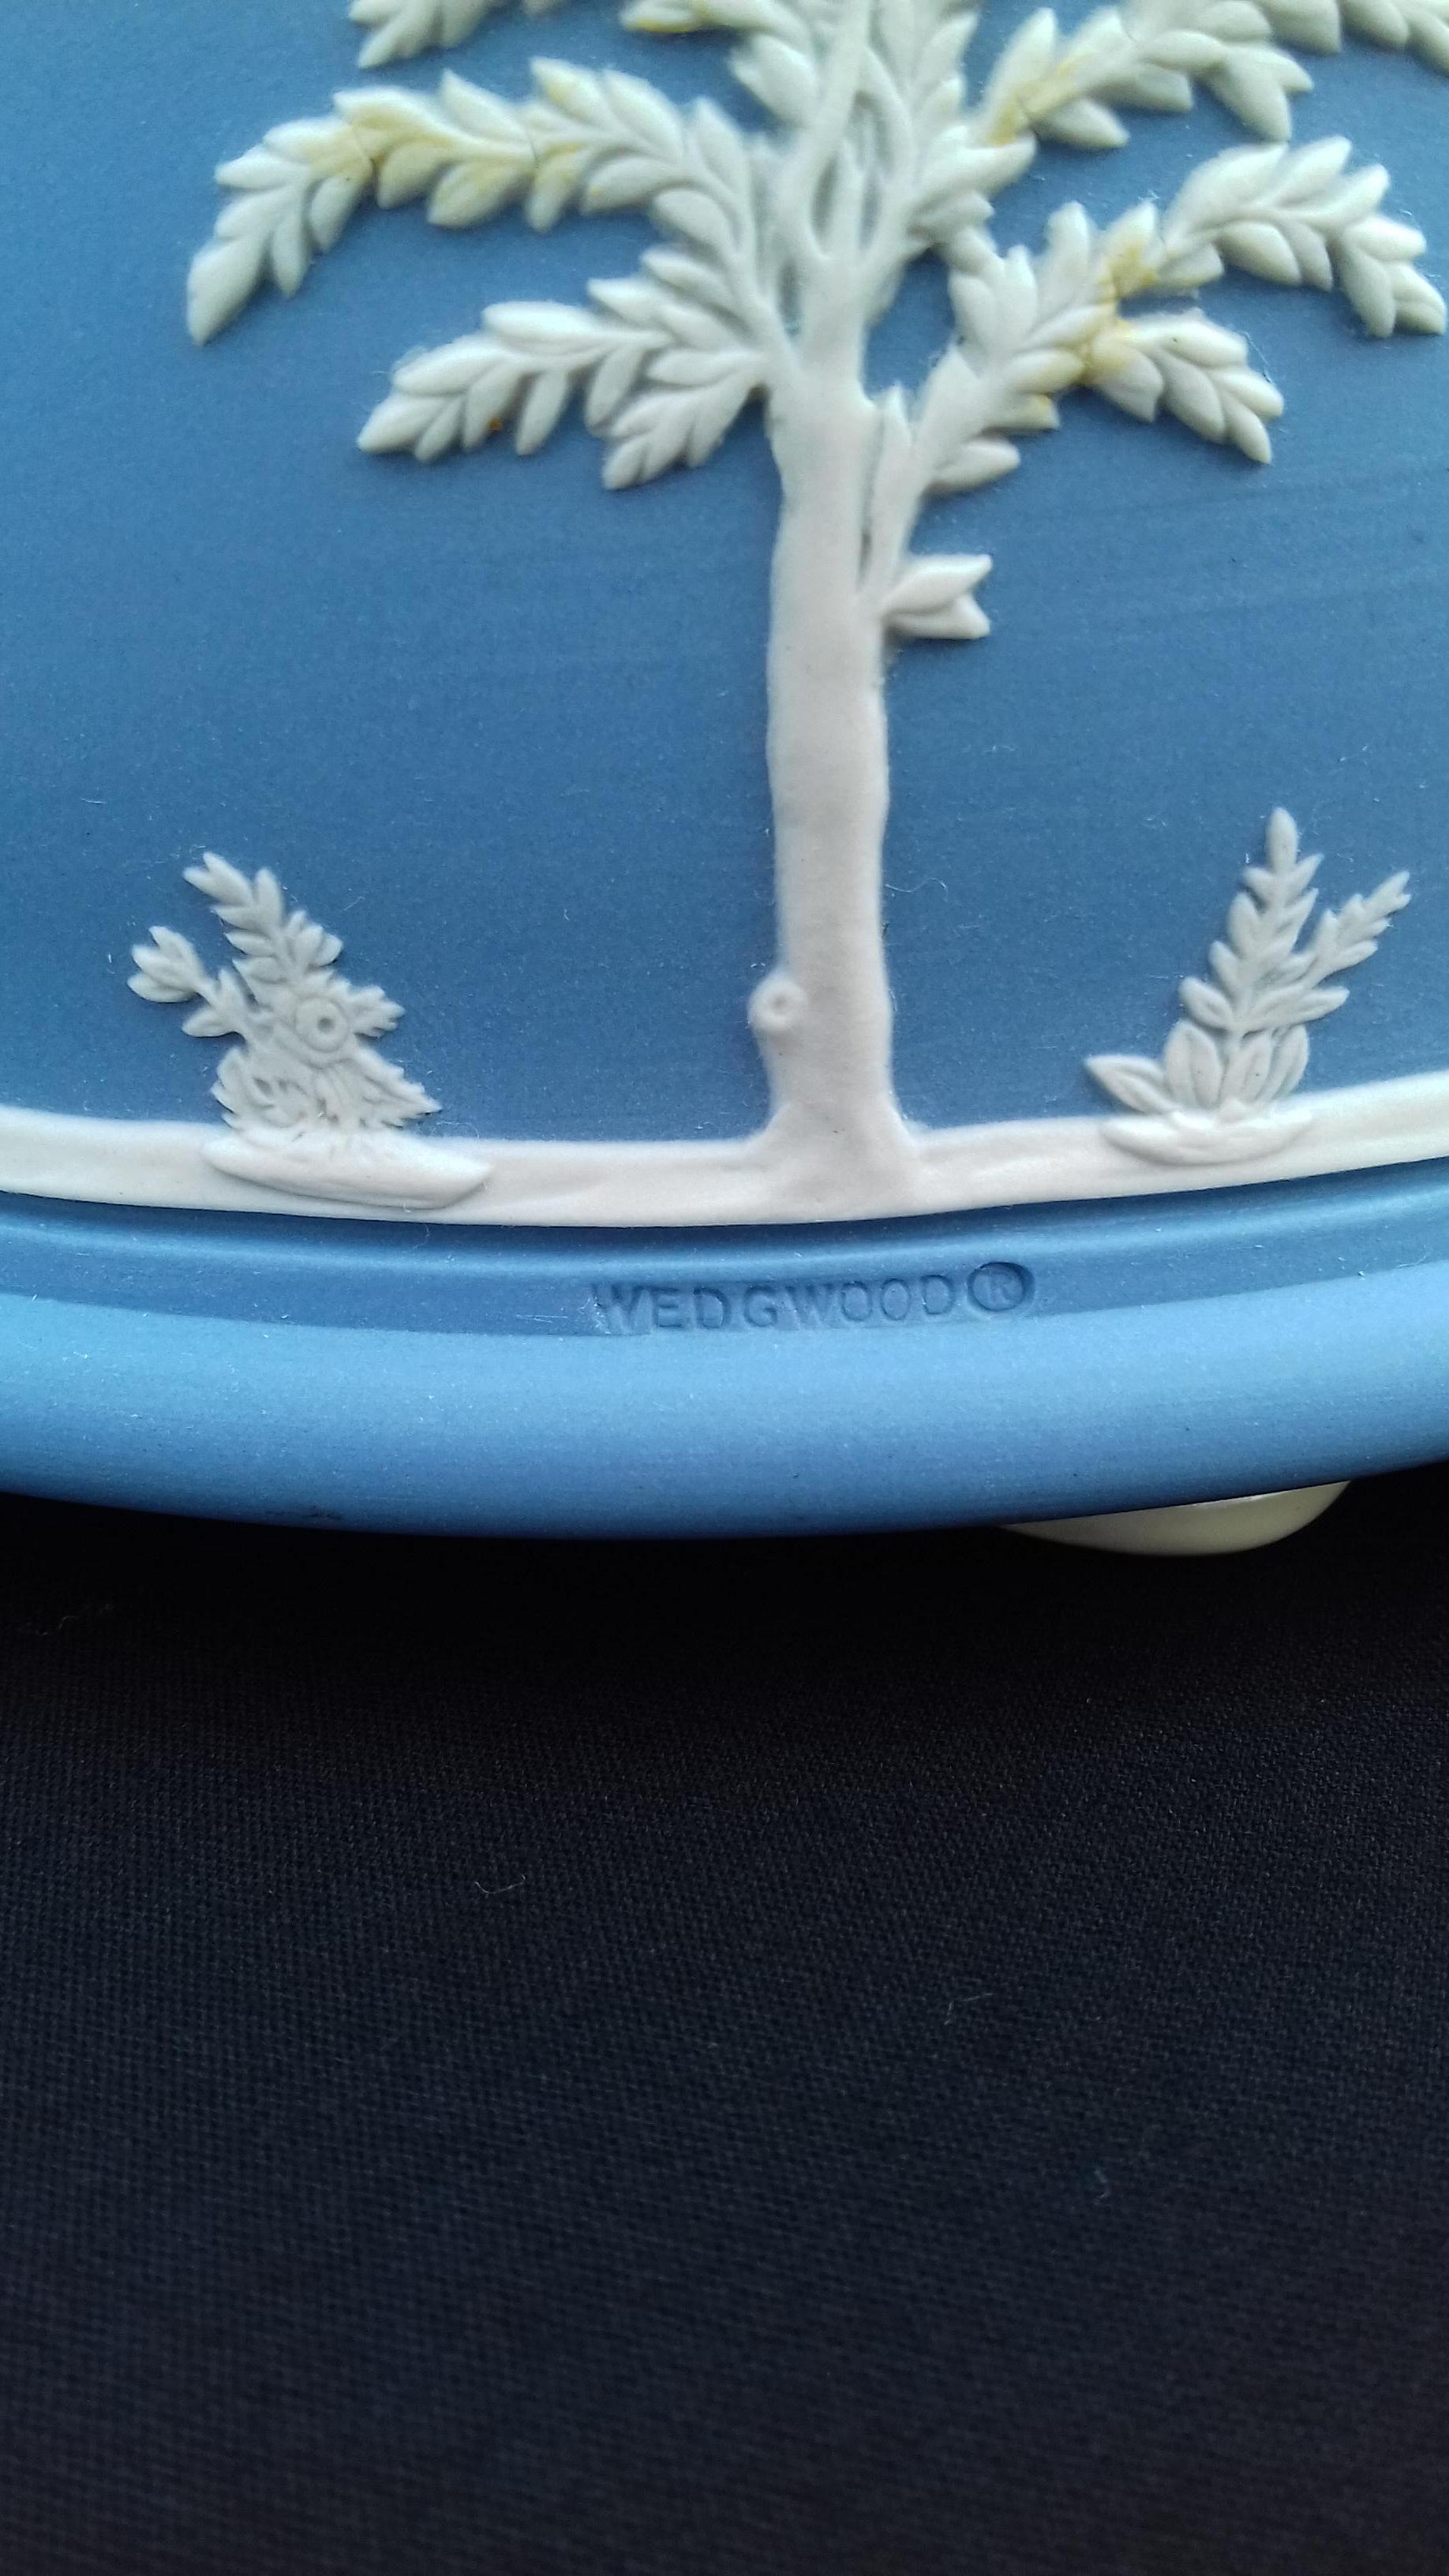 Women's or Men's RARE Wedgwood Jasperware Blue Rotary Dial Telephone Astral Vintage Collector